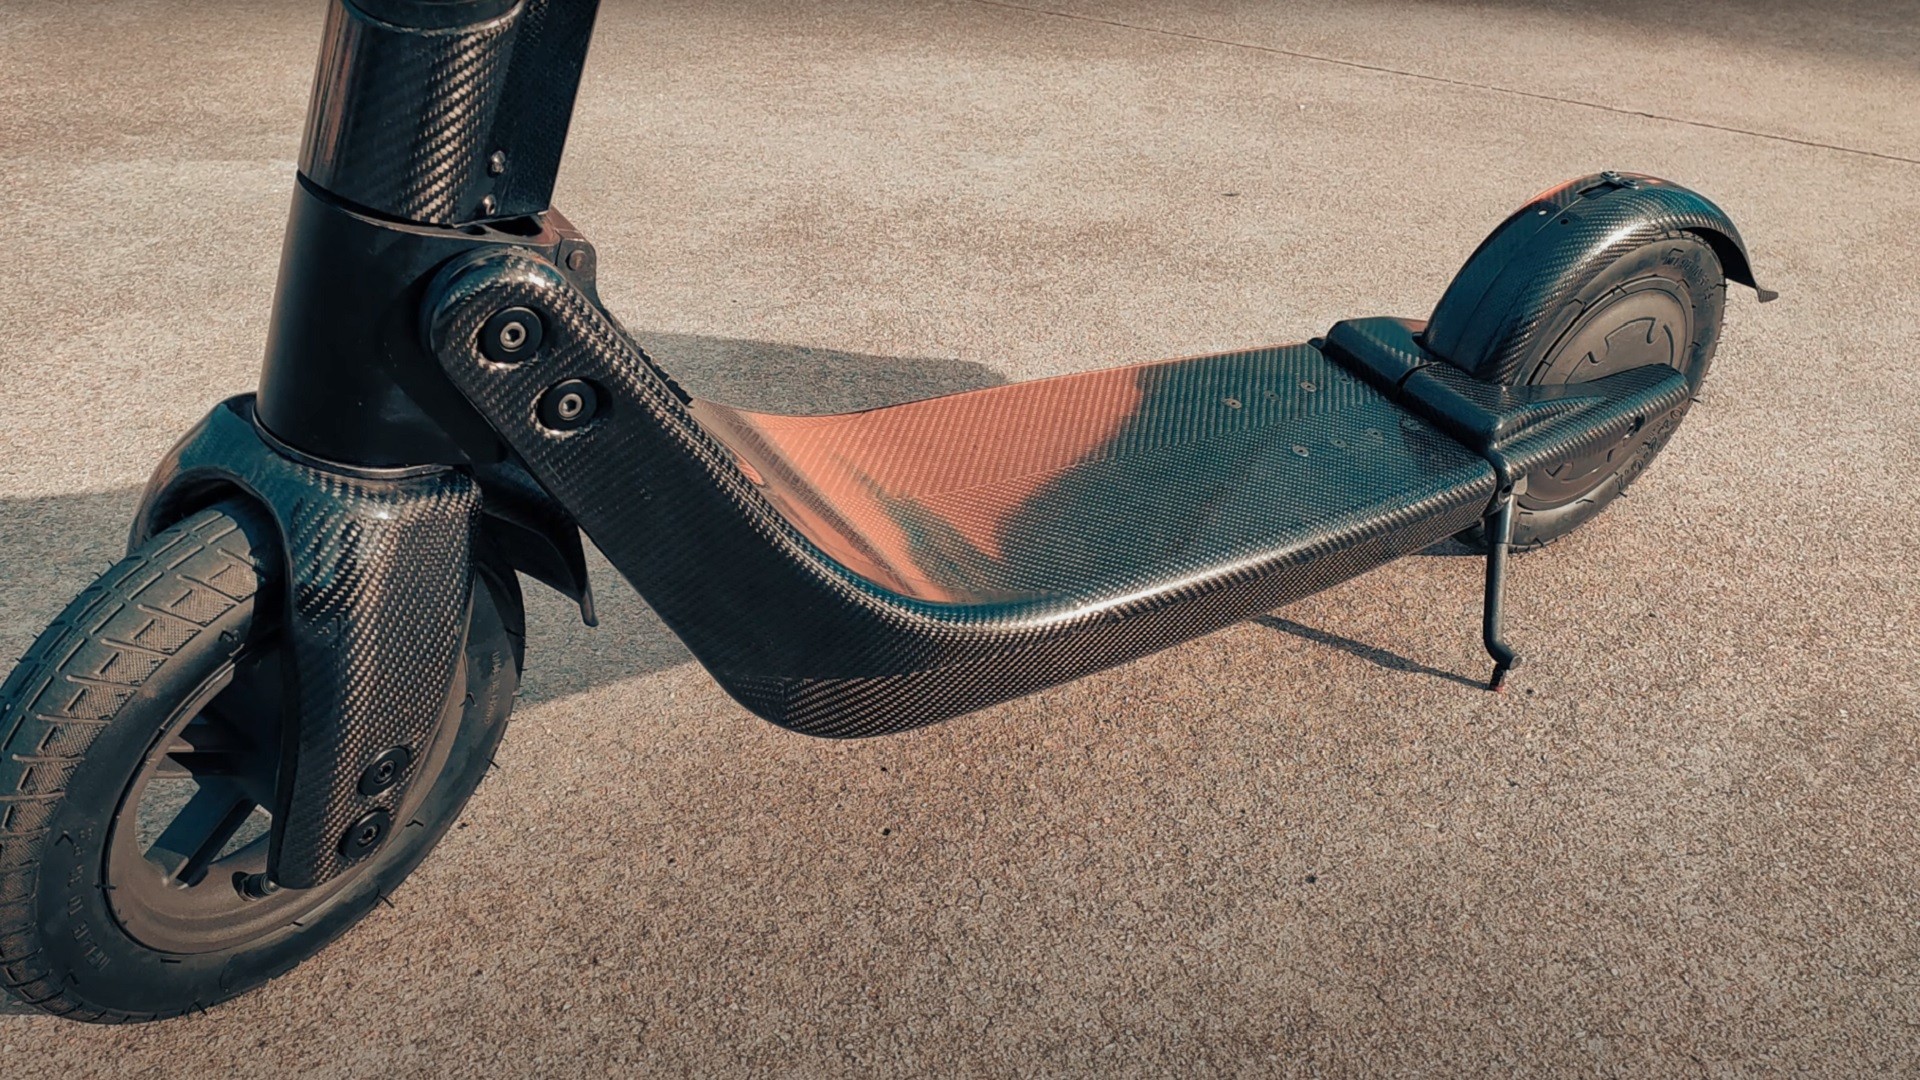 Emuler Fugtig Cater Carbon Fiber CIVI Scooter Is Made the Same Way as the Bugatti Chiron,  Weighs Under 26 Lb - autoevolution